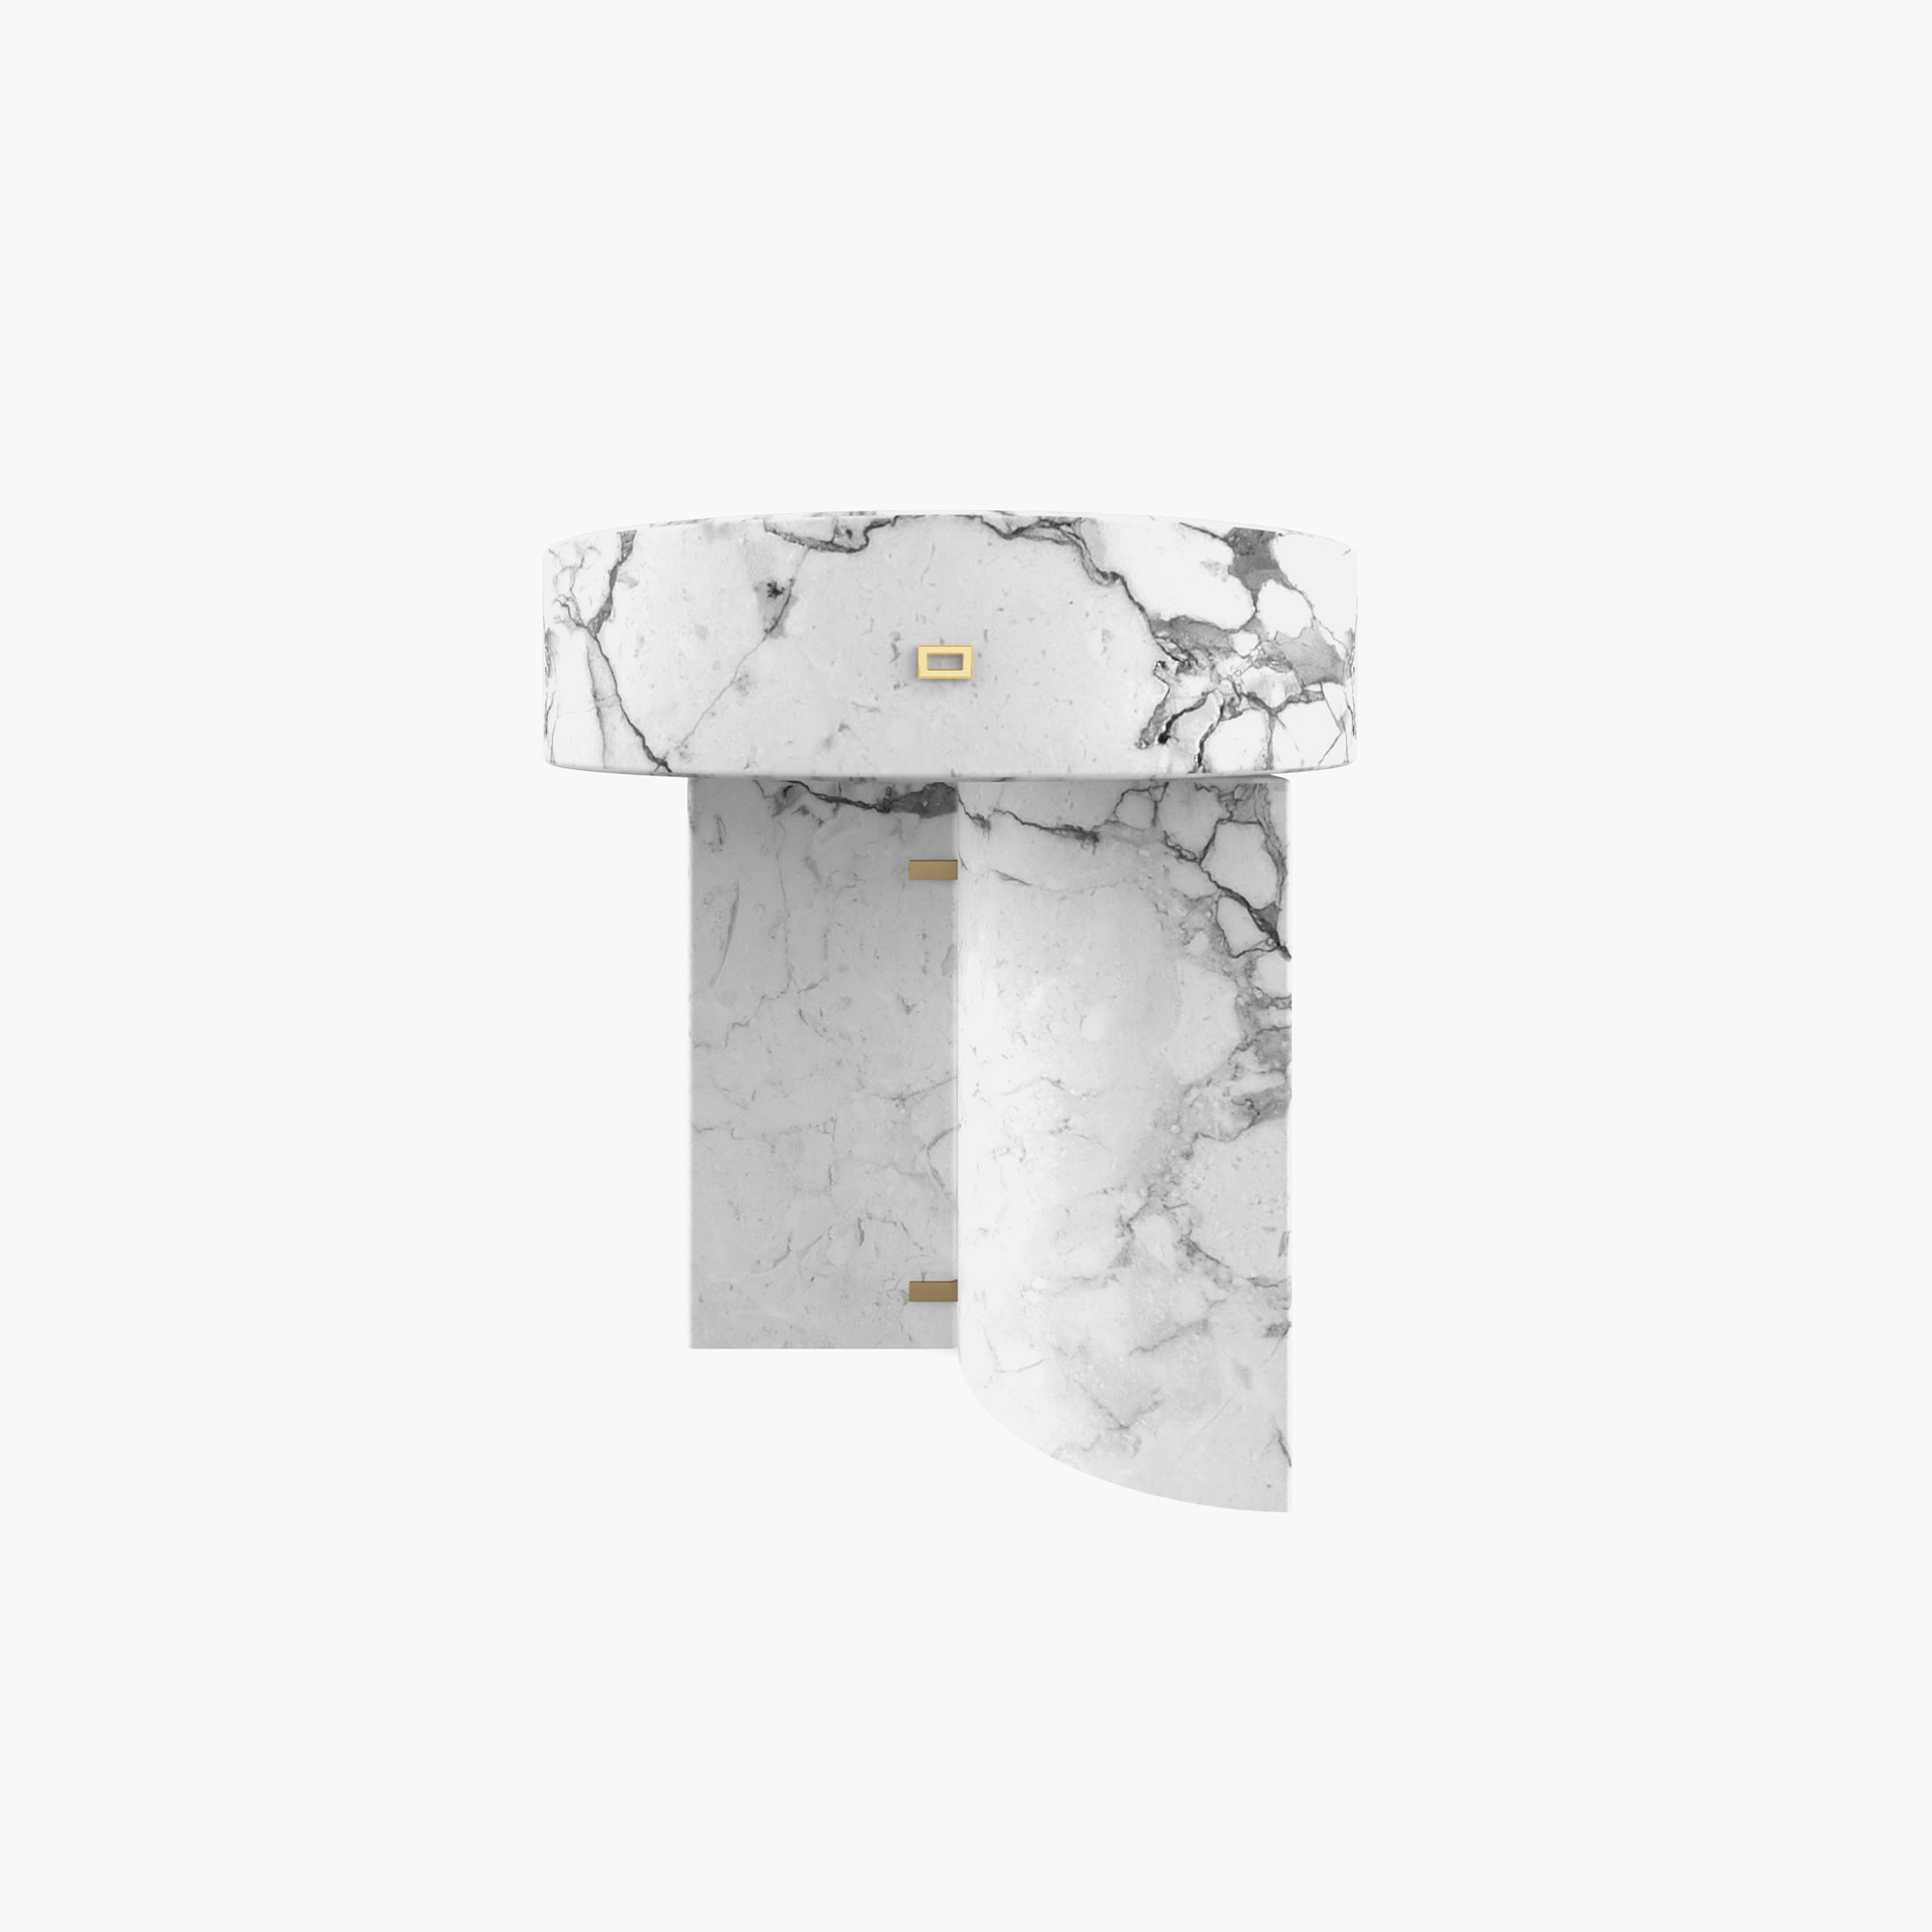 Side Table round Cylinder cuboid prism White Arabescato Marble art Living Room art works Side Tables FS 128 a FELIX SCHWAKE